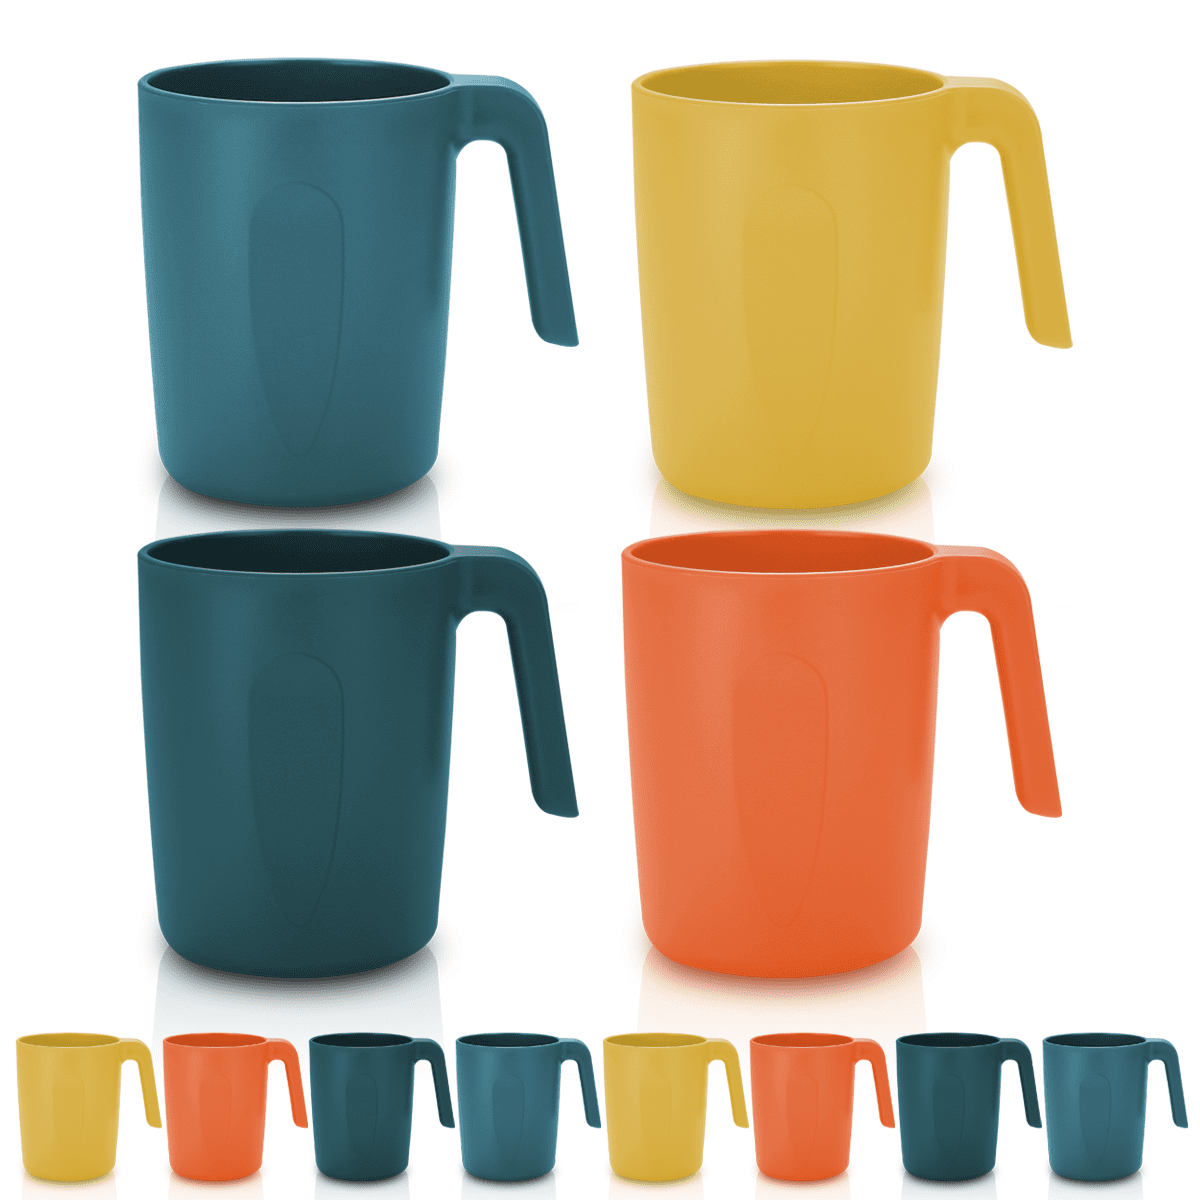 ReaNea Plastic Mug Set 8 Pieces, Unbreakable And Reusable Light Weight Travel Coffee Mugs Espresso Cups Easy to Carry And Clean BPA Free - image 1 of 9